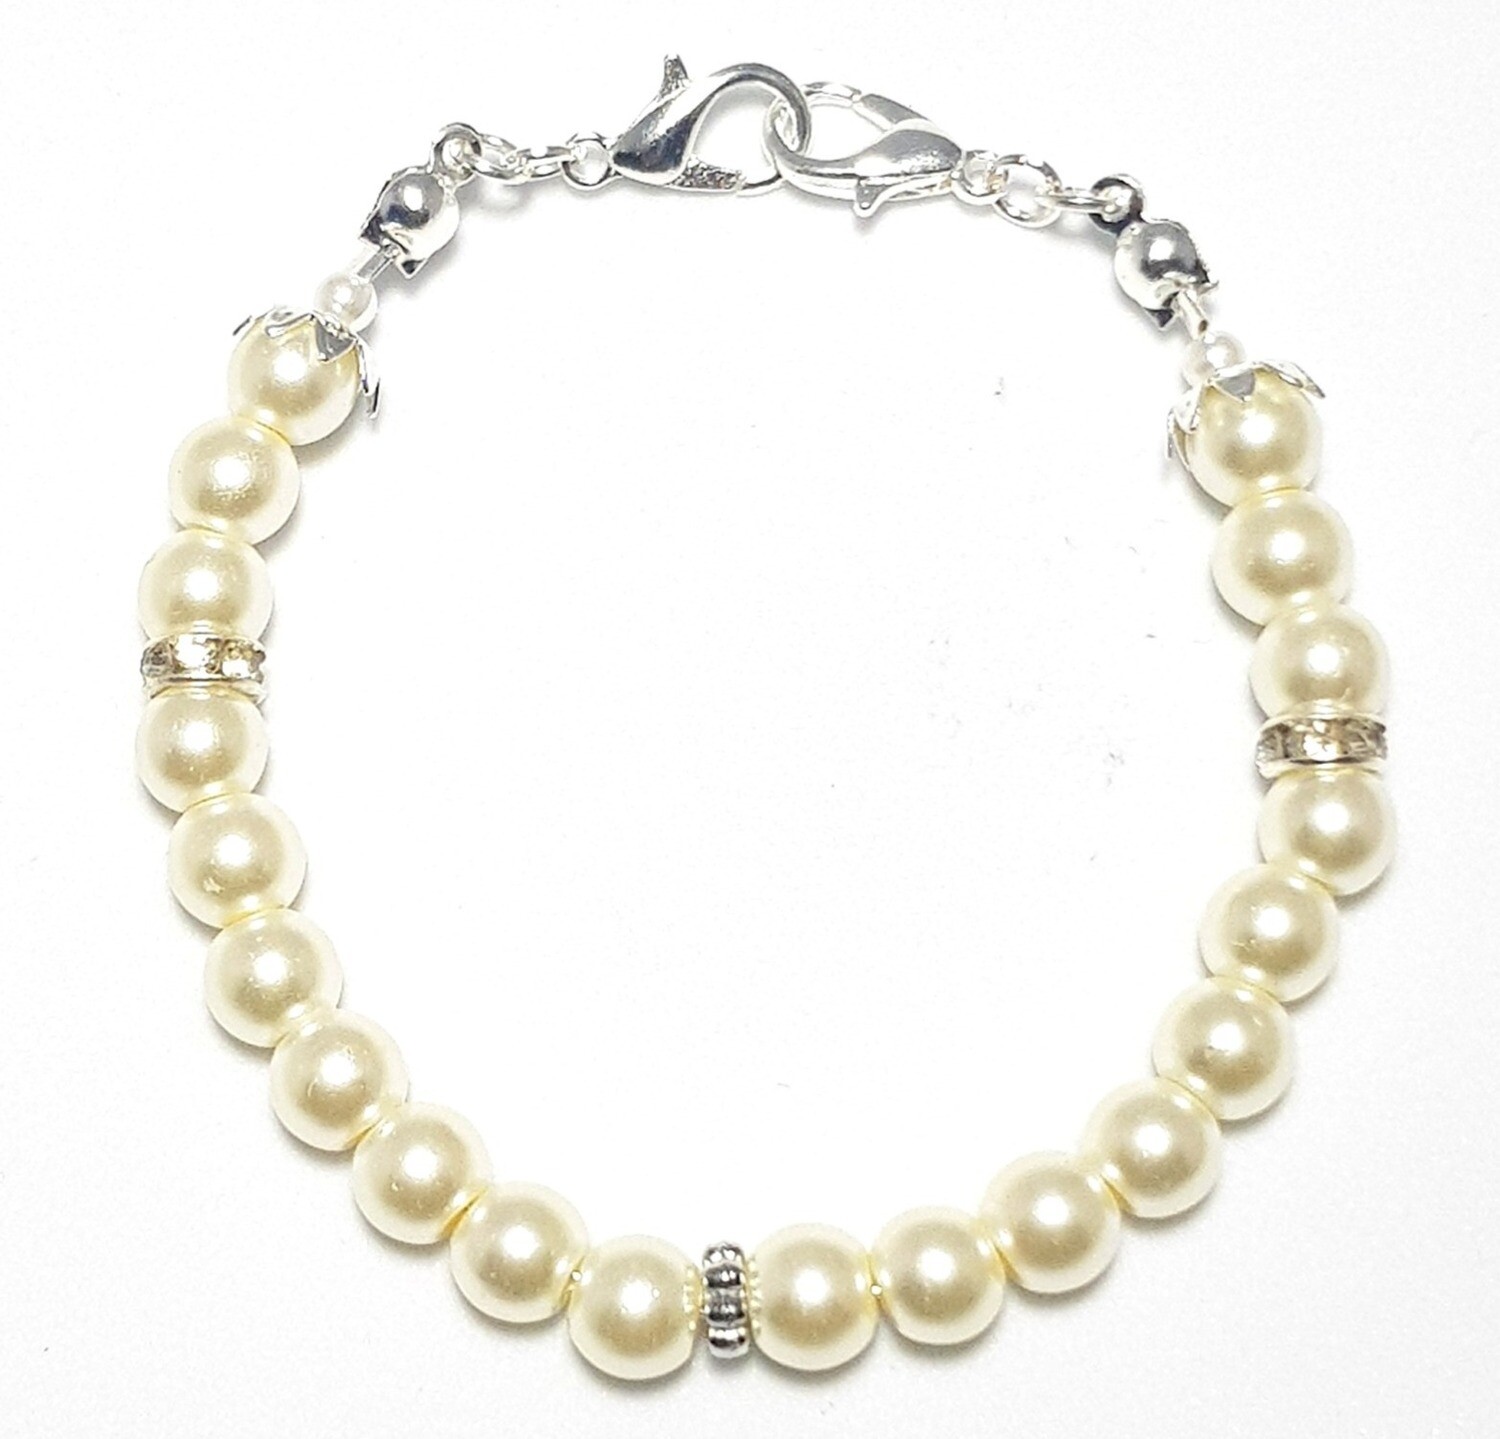 Bracelet & Face Mask Extender Dual Function (Afaf - Silver & Pearl Beads)